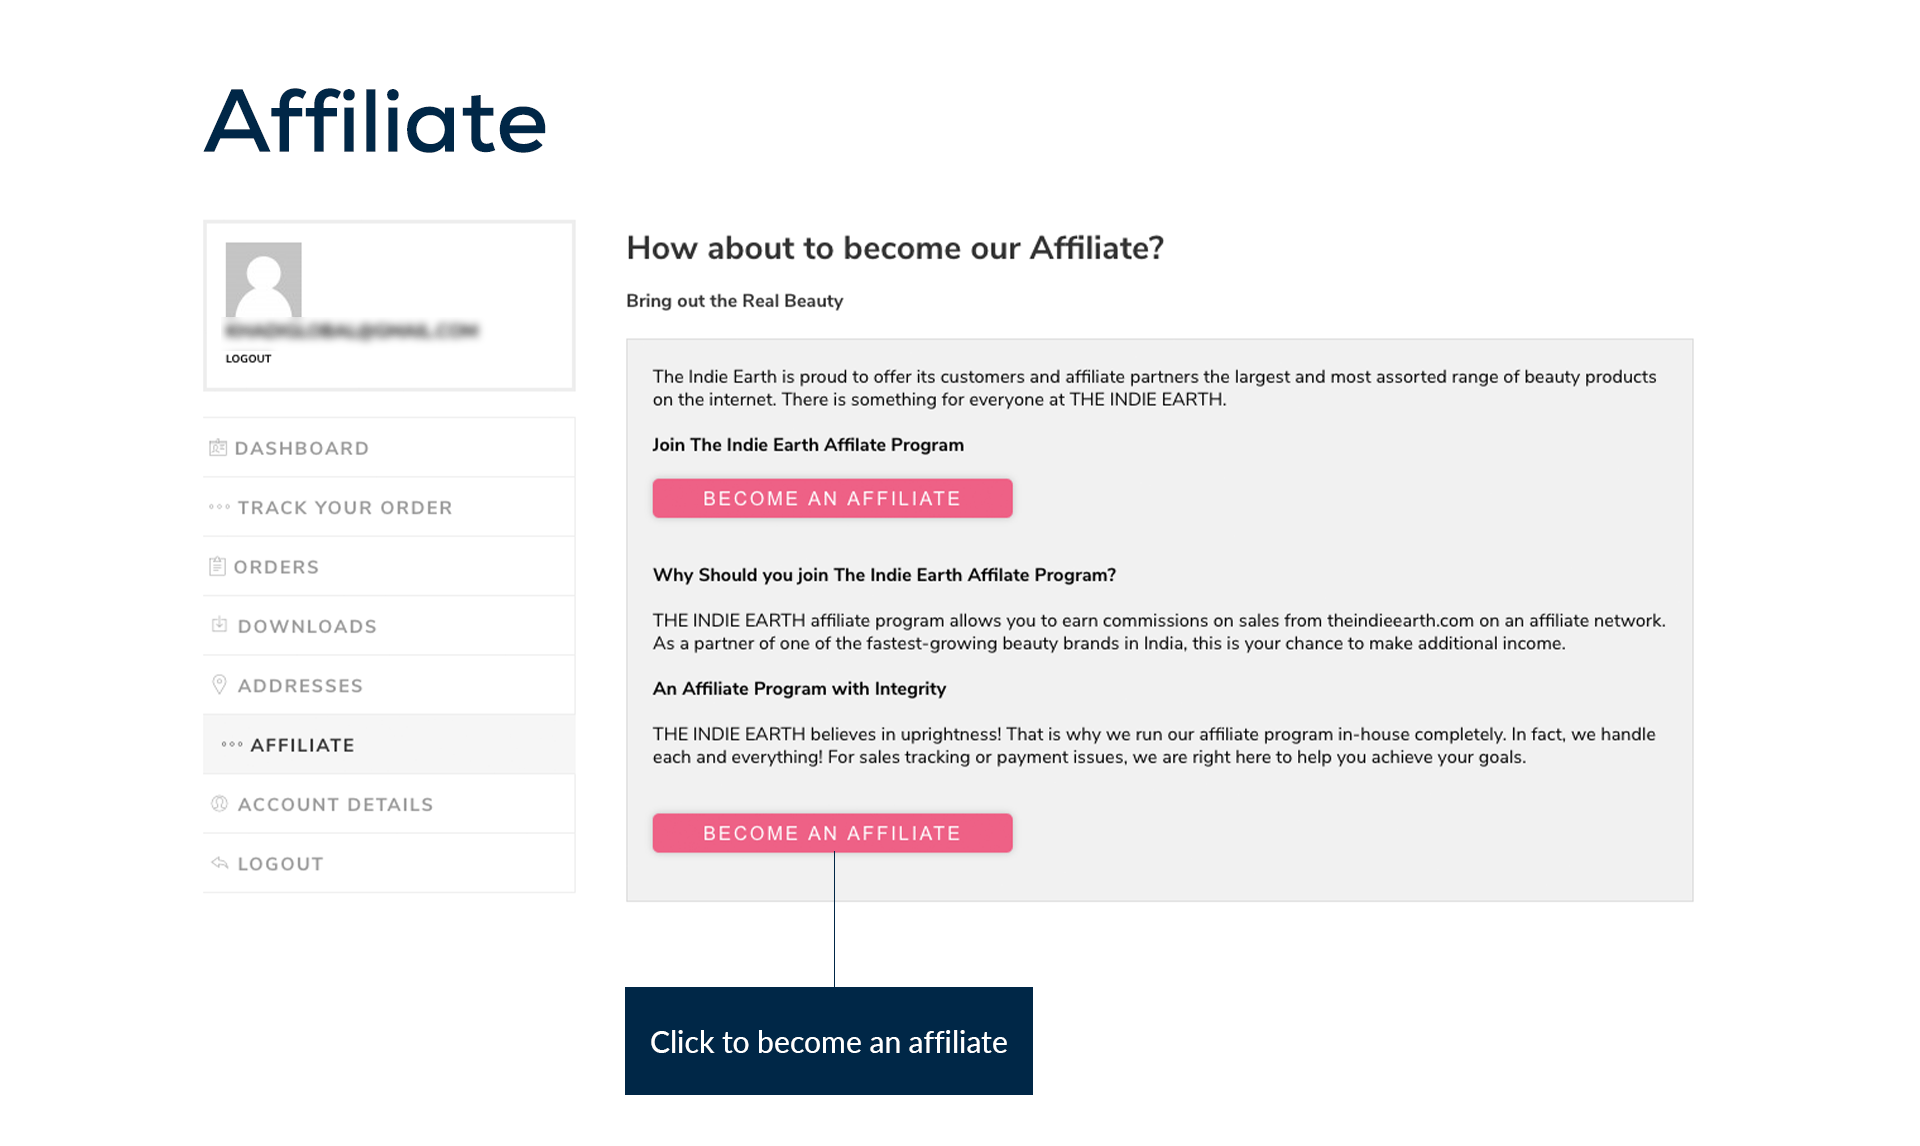 become-an-affiliate